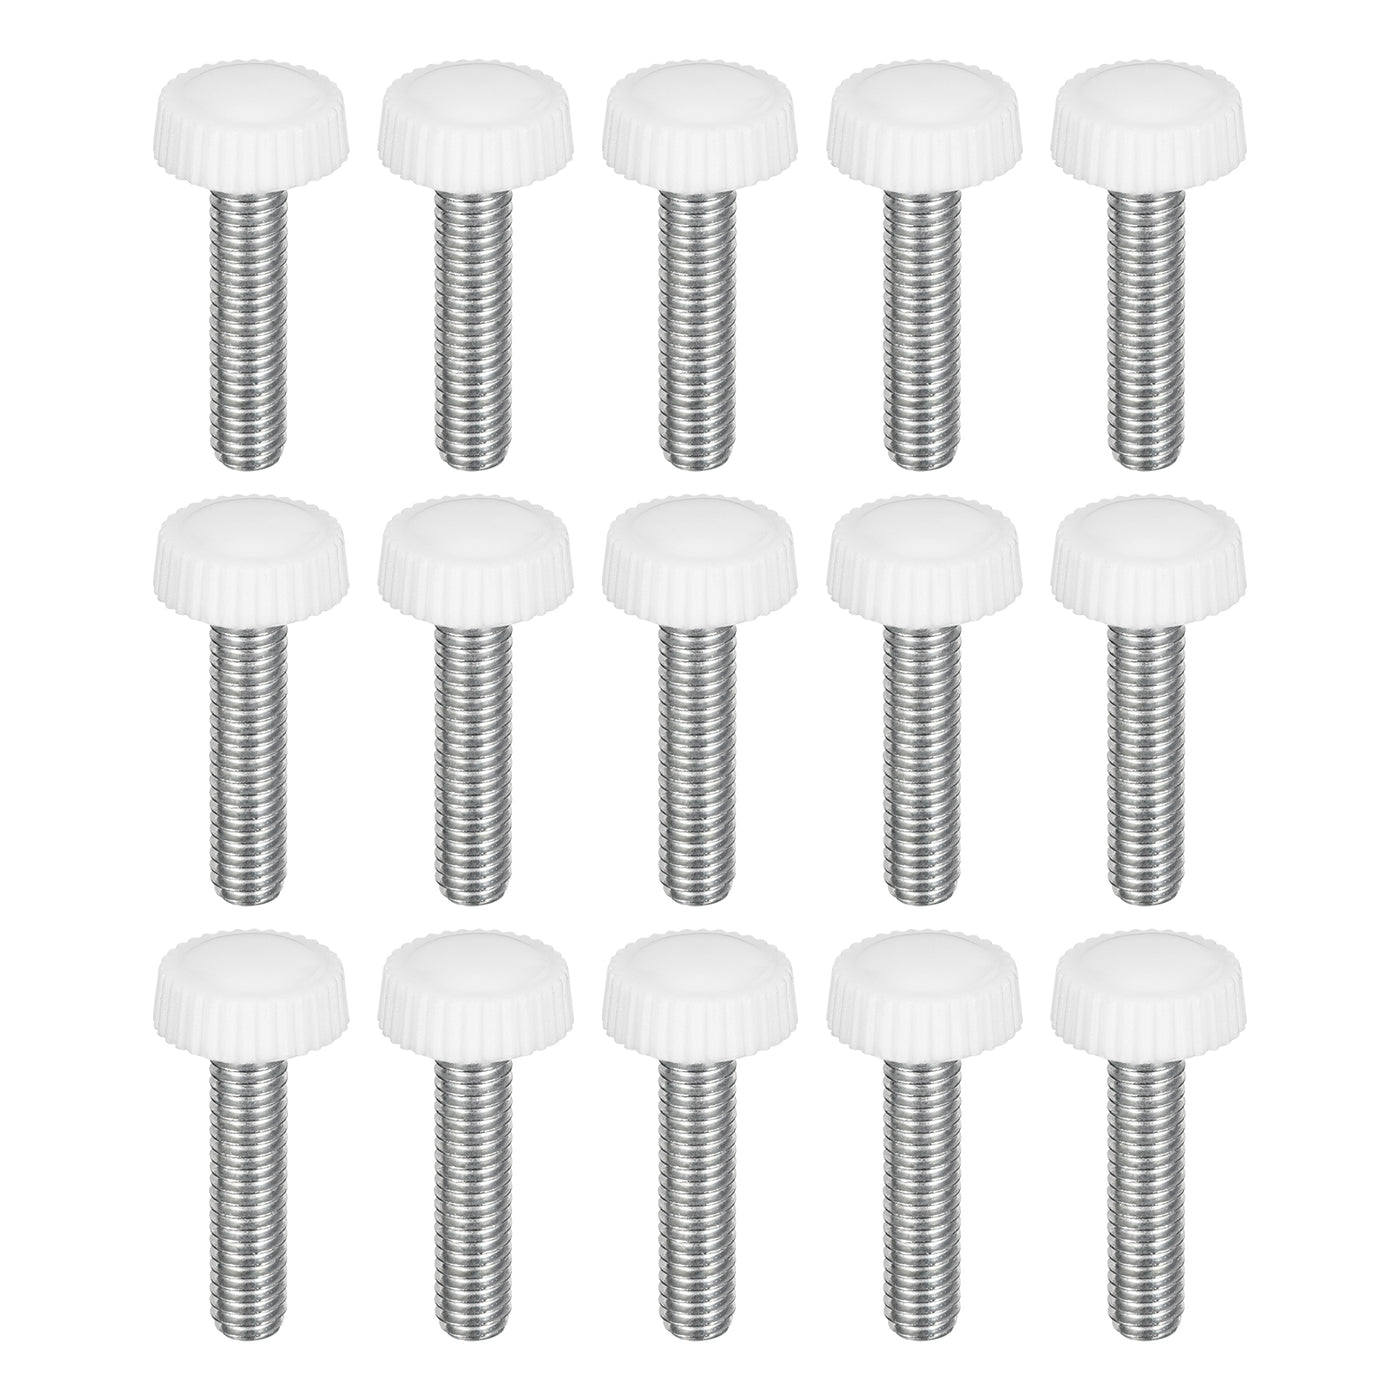 uxcell Uxcell 15Pcs M6x25mm Threaded Knurled Thumb Screws, Zinc Plated Carbon Steel White